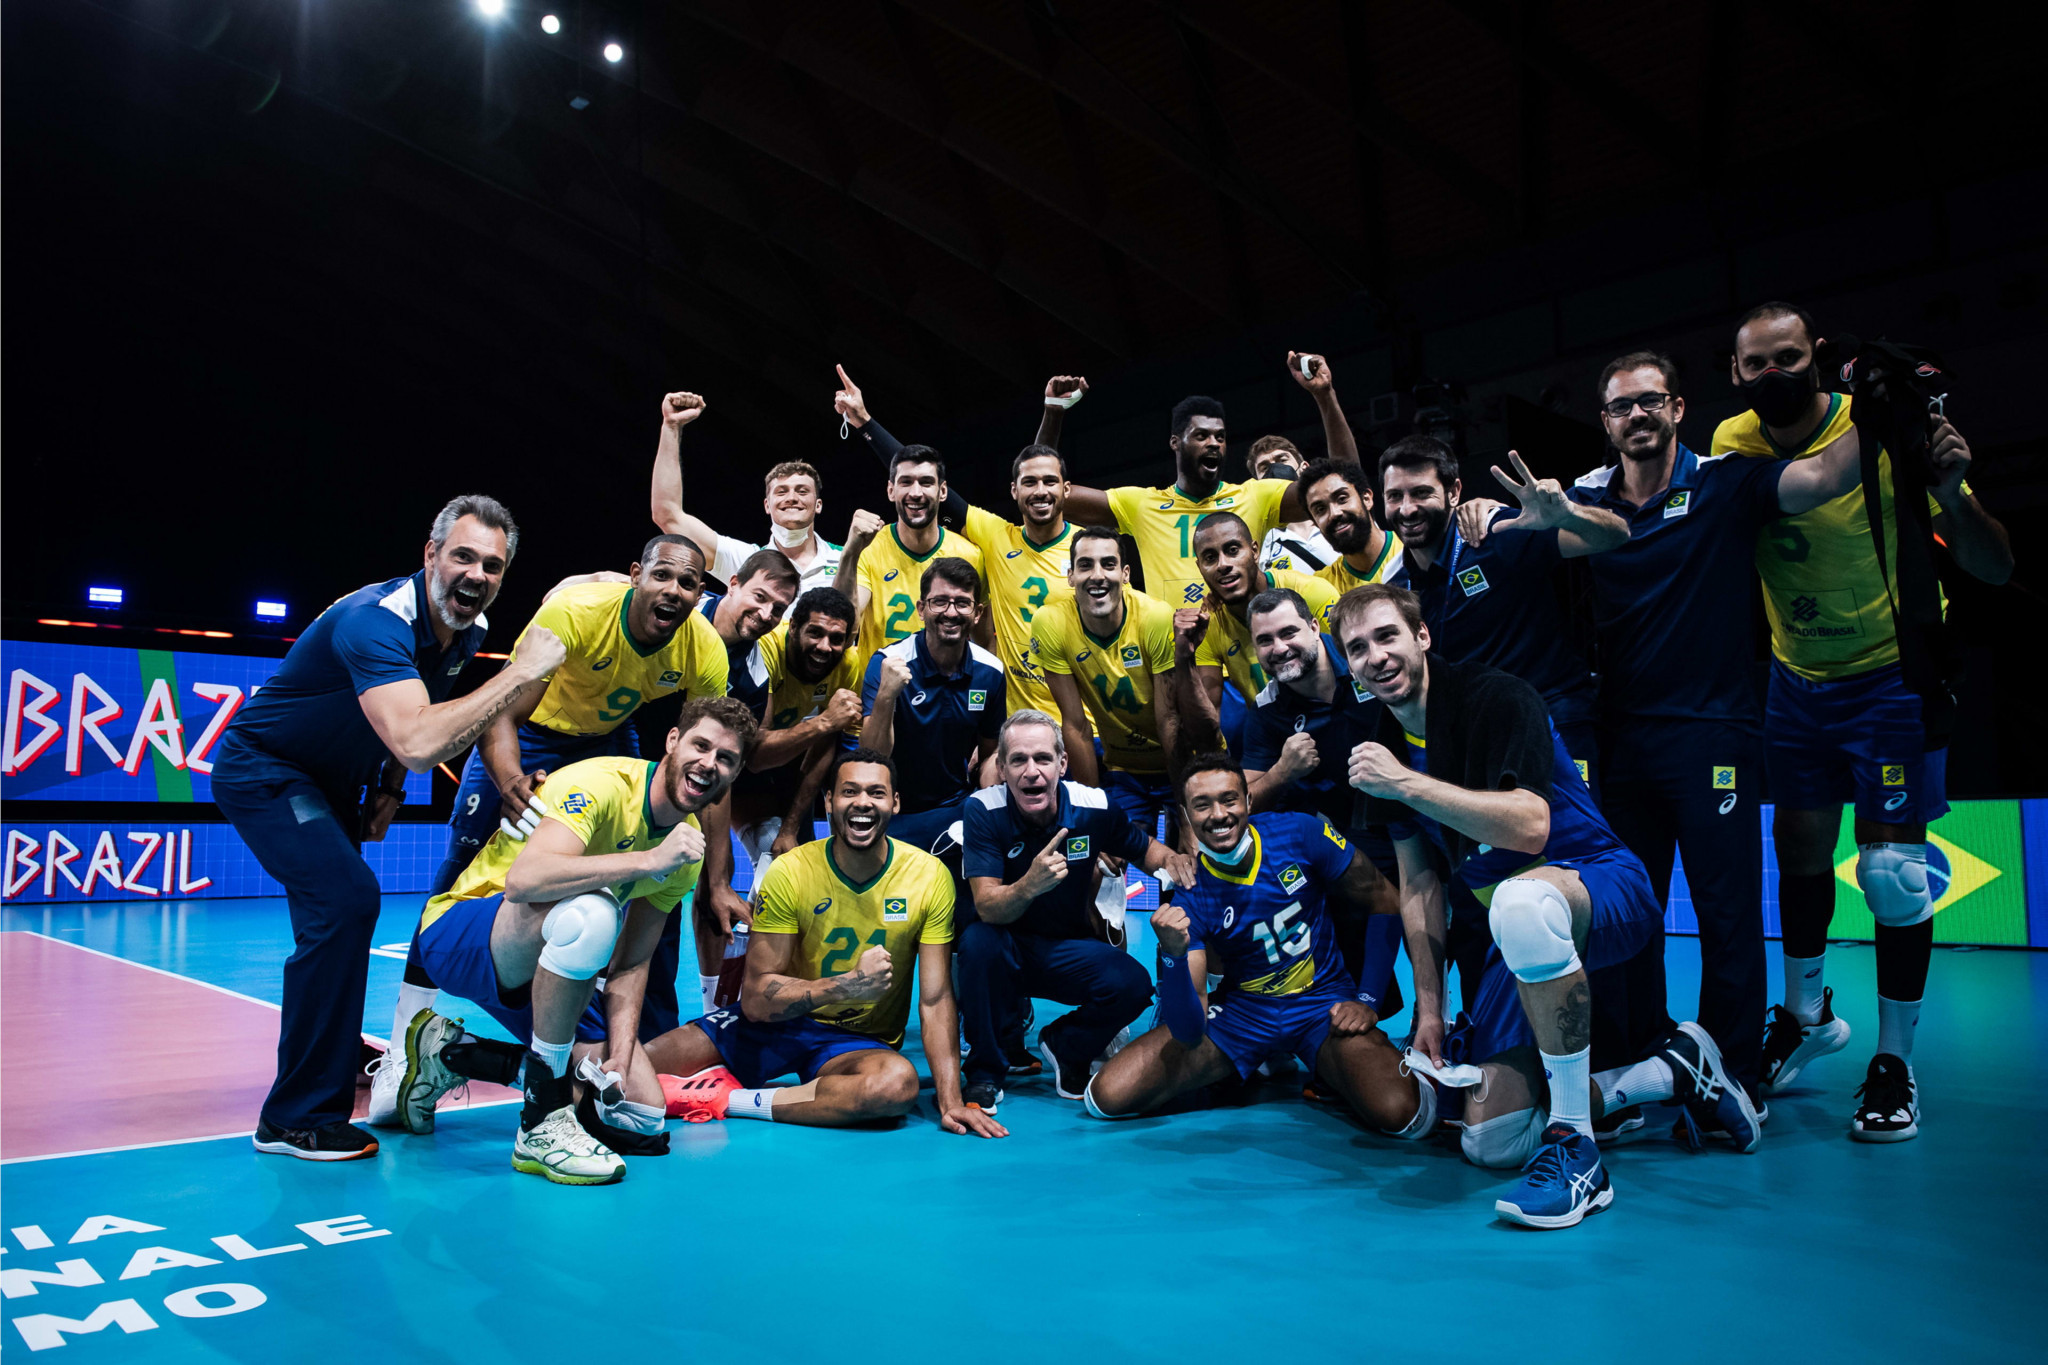 Brazil celebrate after winning their 10th match out of 11 at the men's Volleyball Nations League in Rimini ©Volleyball World